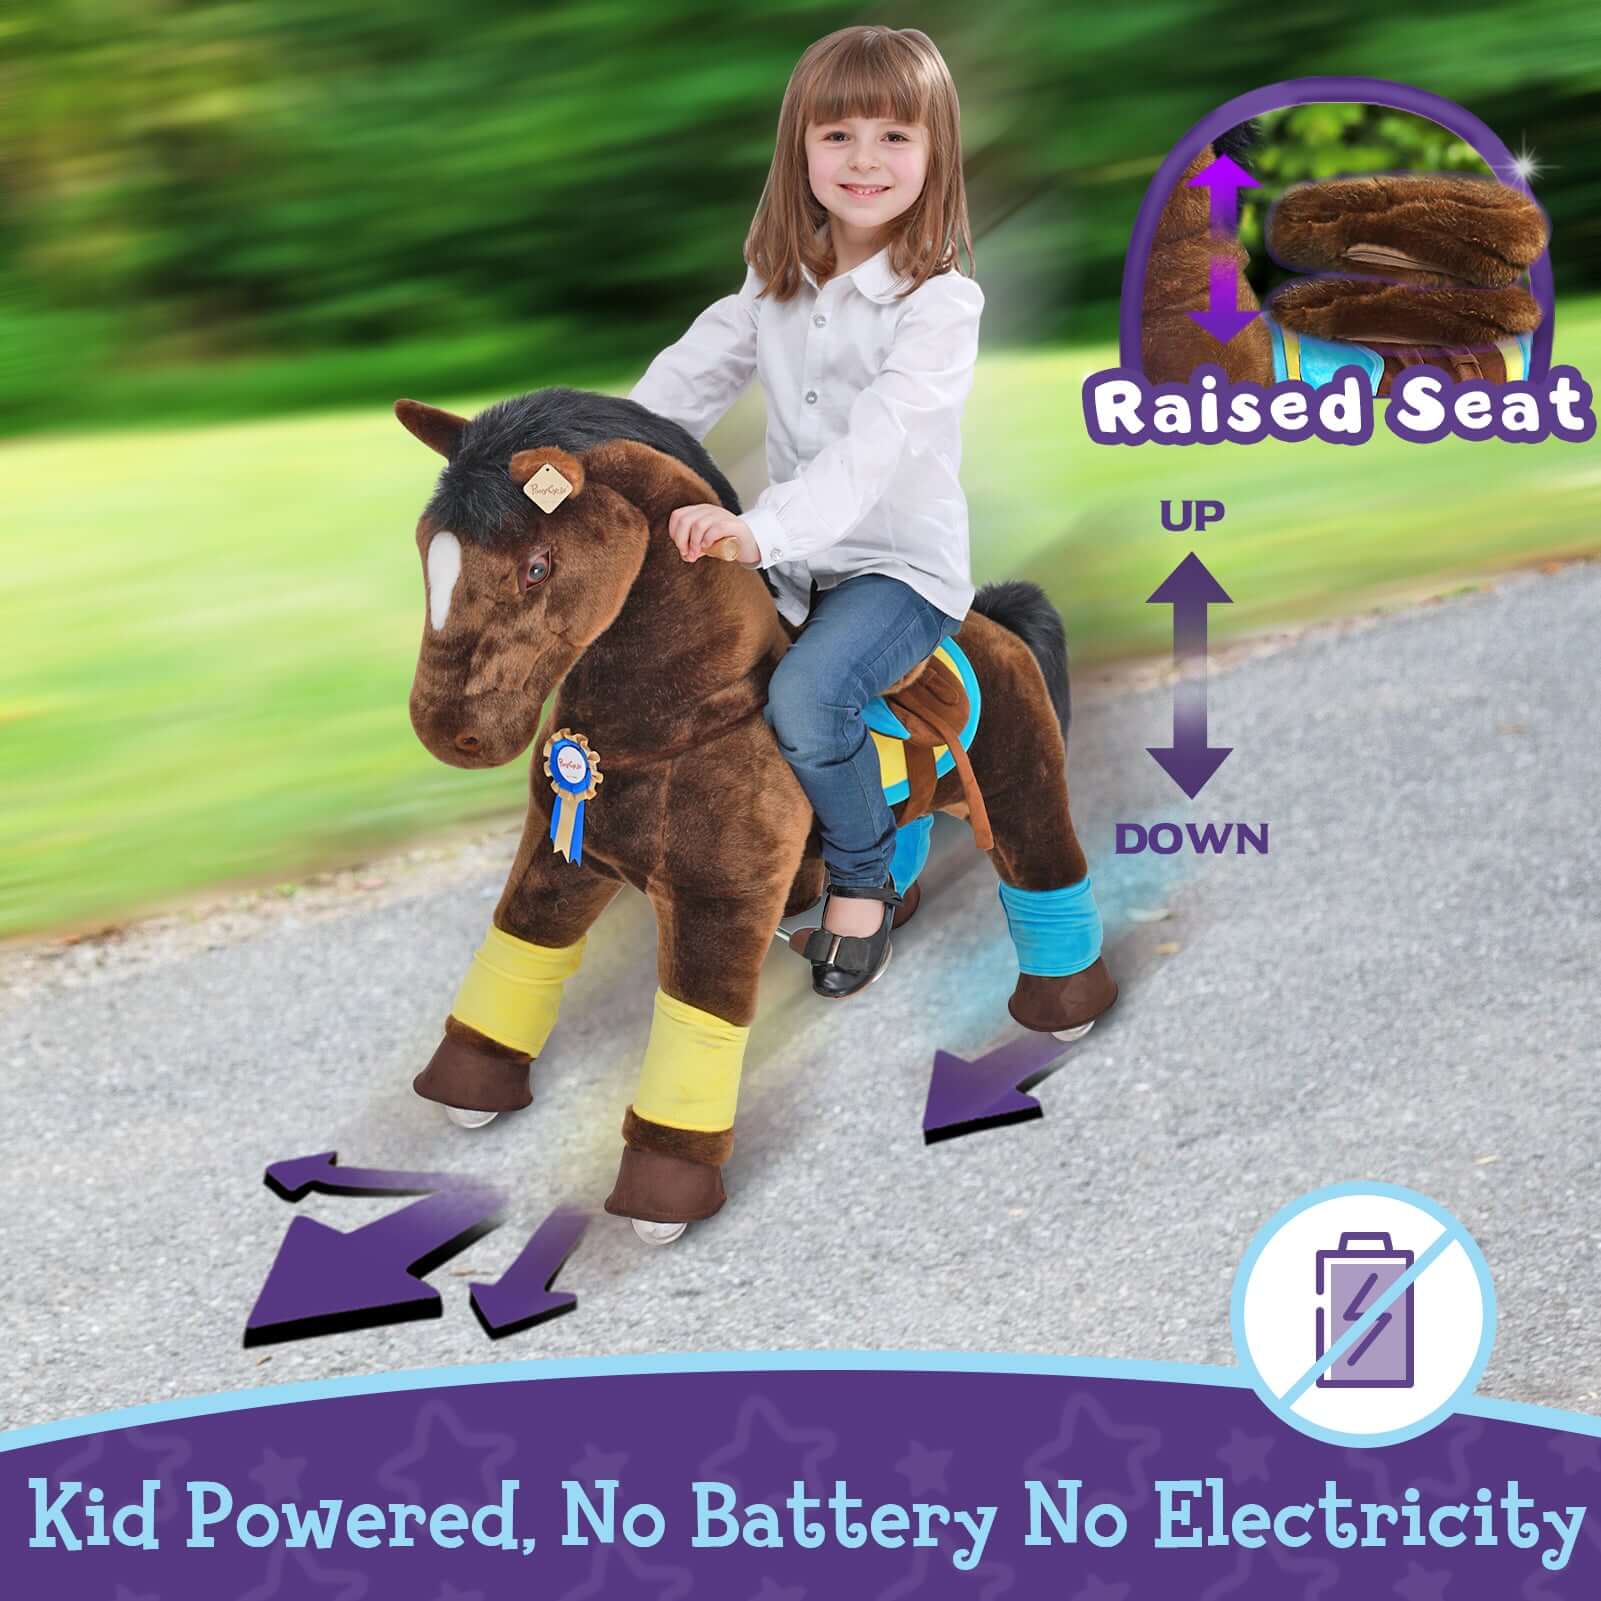 Model K Chocolate Ride On Horse For Age 3-5 (accessories Included)